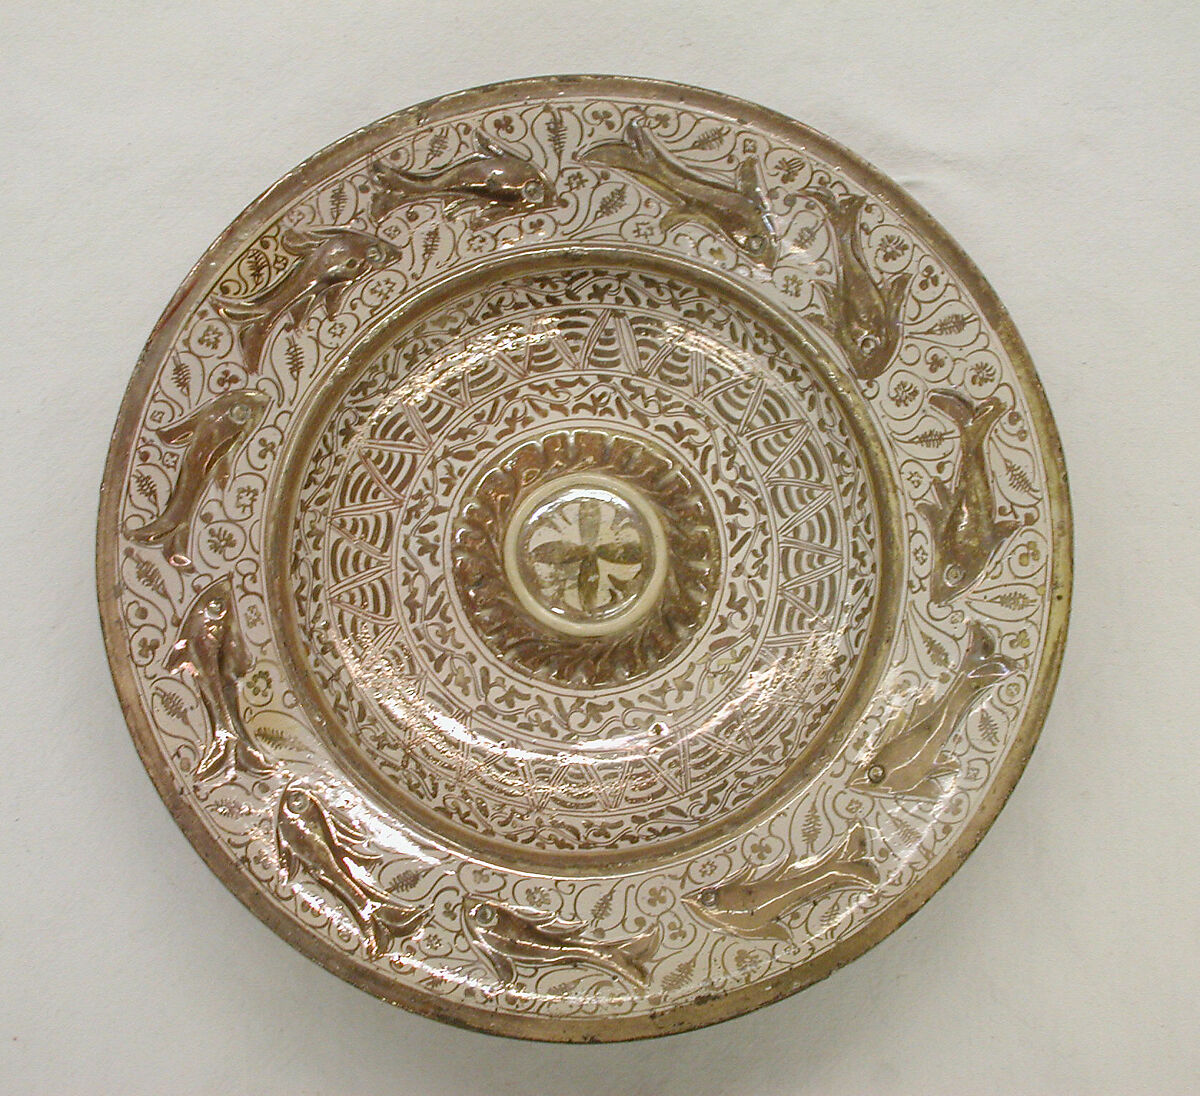 Dish, Tin-glazed and luster-painted earthenware, Spanish, Catalonia 